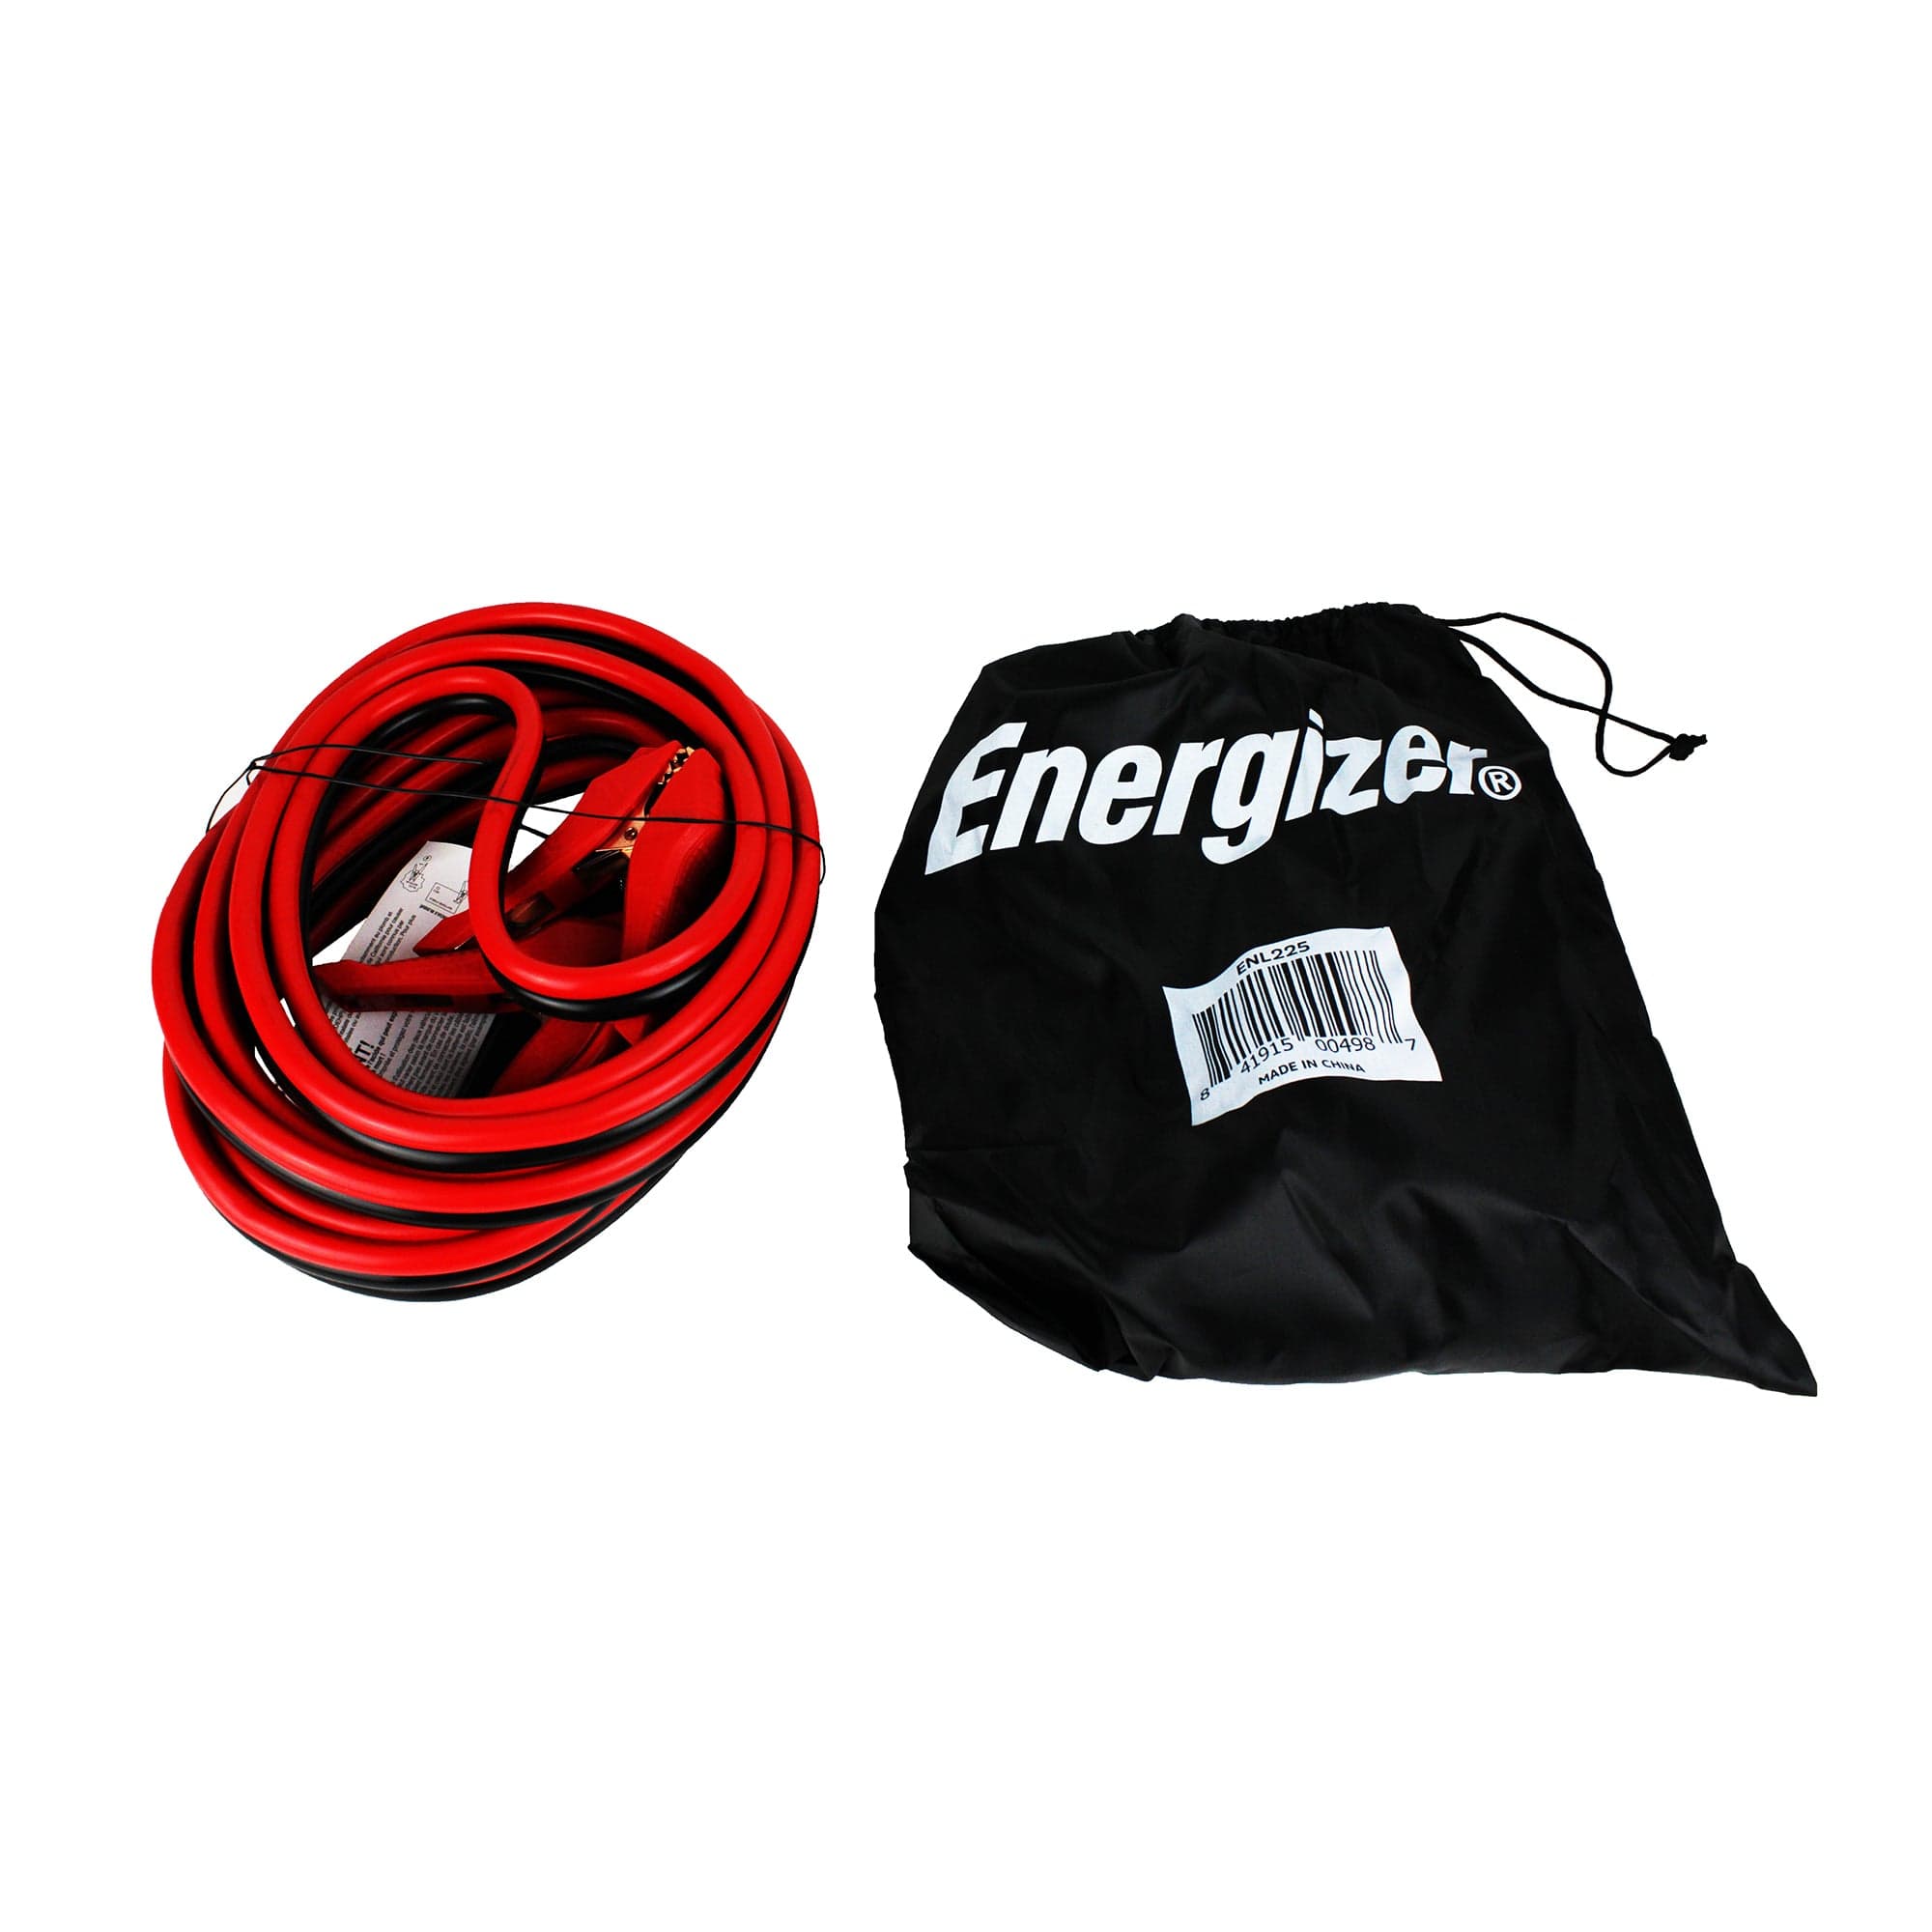 PowerBright ENL225 Energizer 25' Booster Battery Cables W/ LED Clamps, 2 Gauge, 1000A